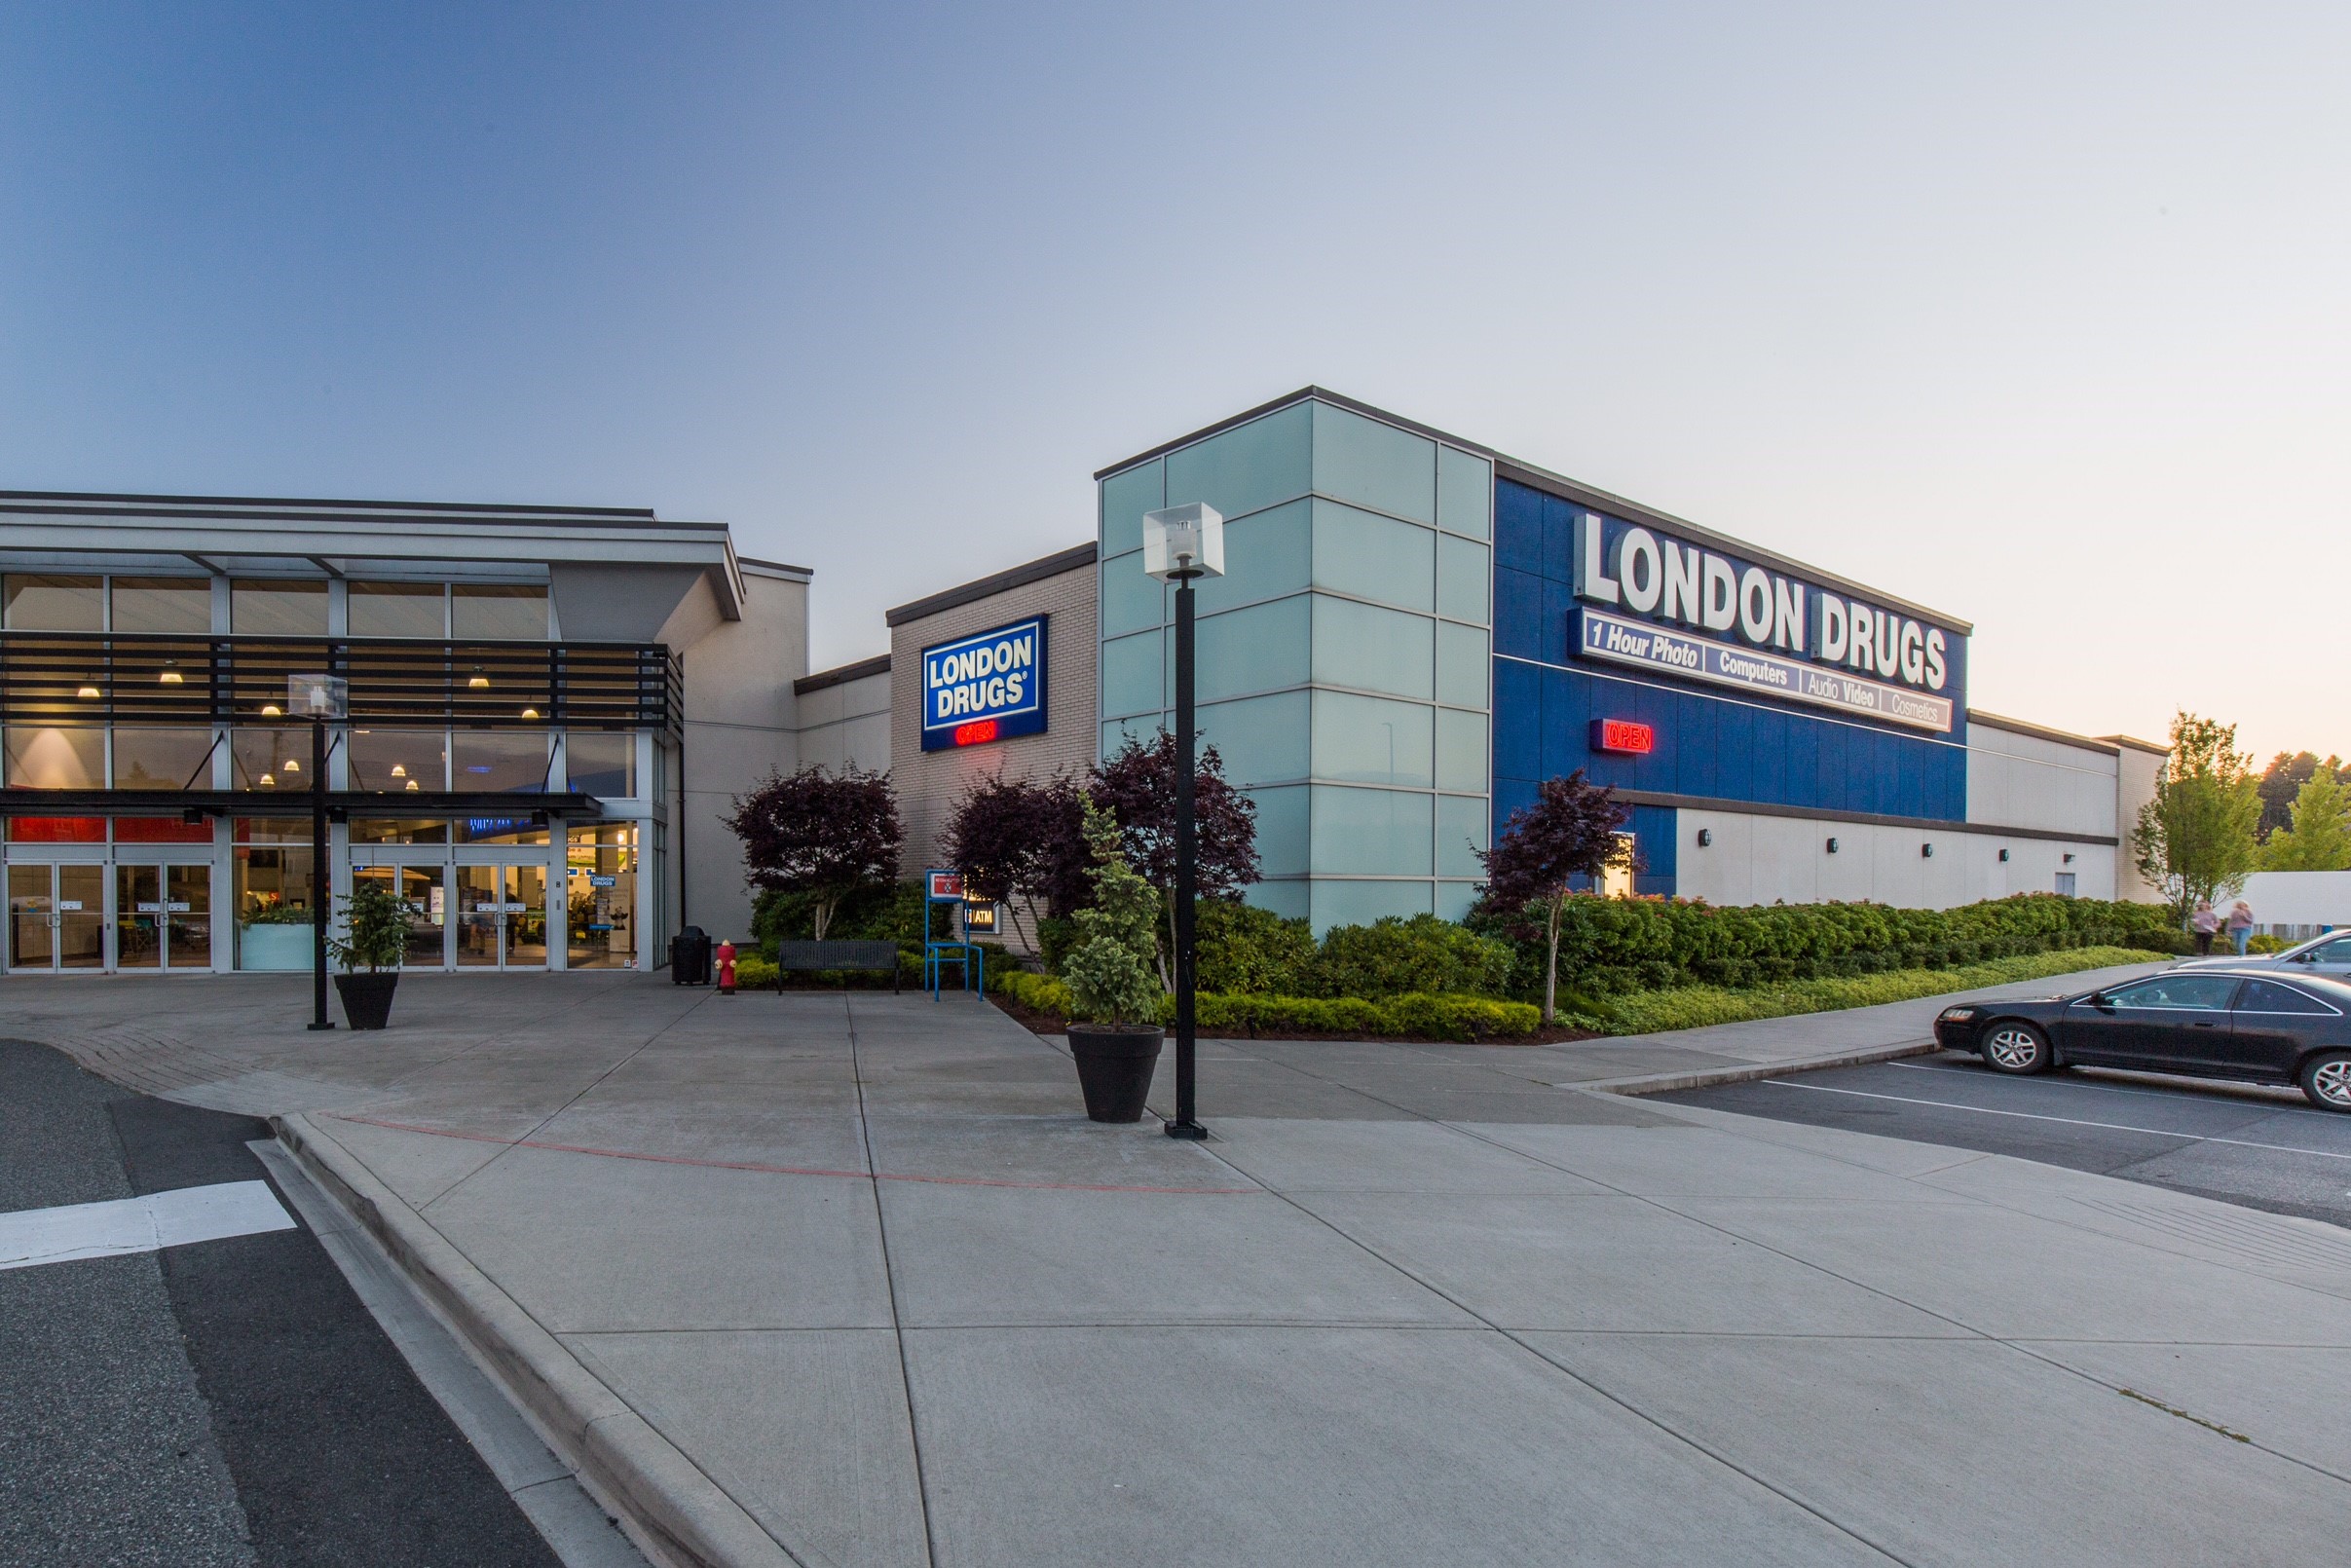 About London Drugs